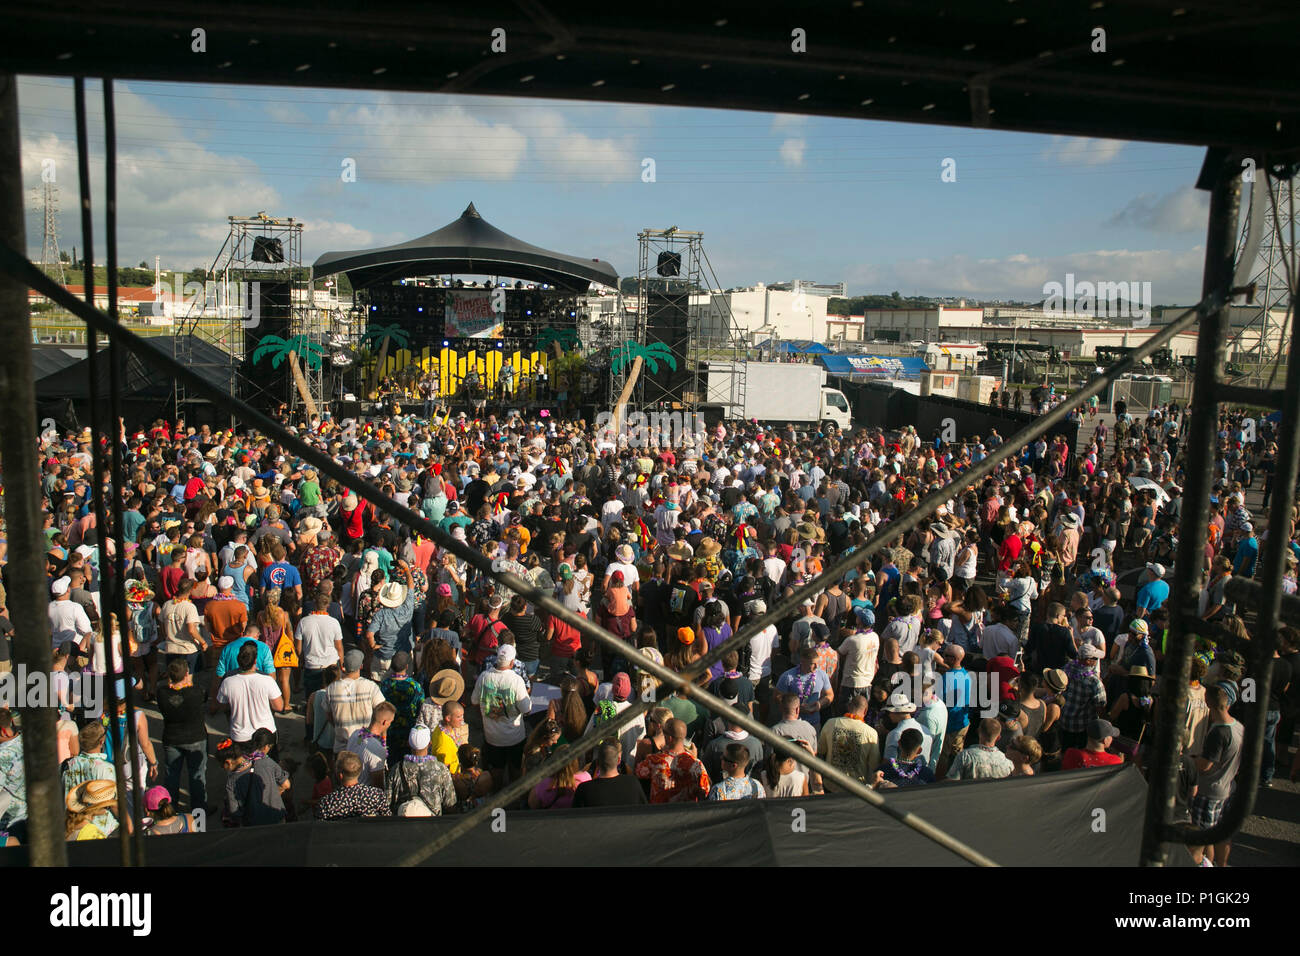 Jimmy Buffett and the Coral Reefers perform at a concert on Camp Foster, Okinawa, Japan, October 28, 2016. This is the first time Buffett has performed in Okinawa. The show was a free concert scheduled as part of the “I Don’t Know” tour. (U.S. Marine Corps photo by PFC Jonah Baase) Stock Photo